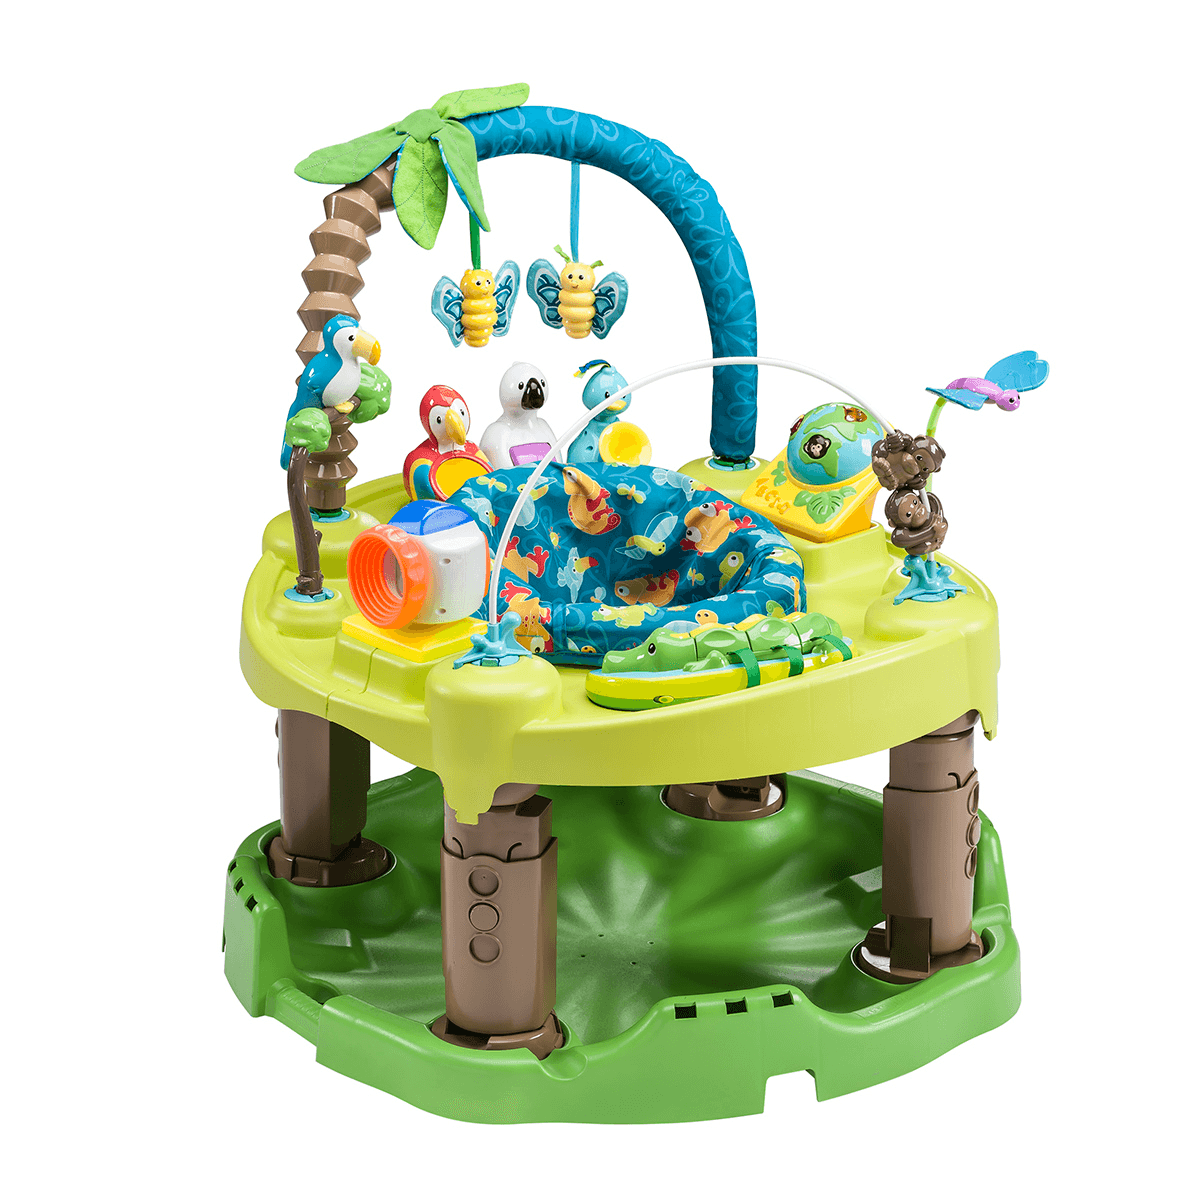 Life In The Amazon Triple Fun Bouncing Activity Saucer - MacroBaby